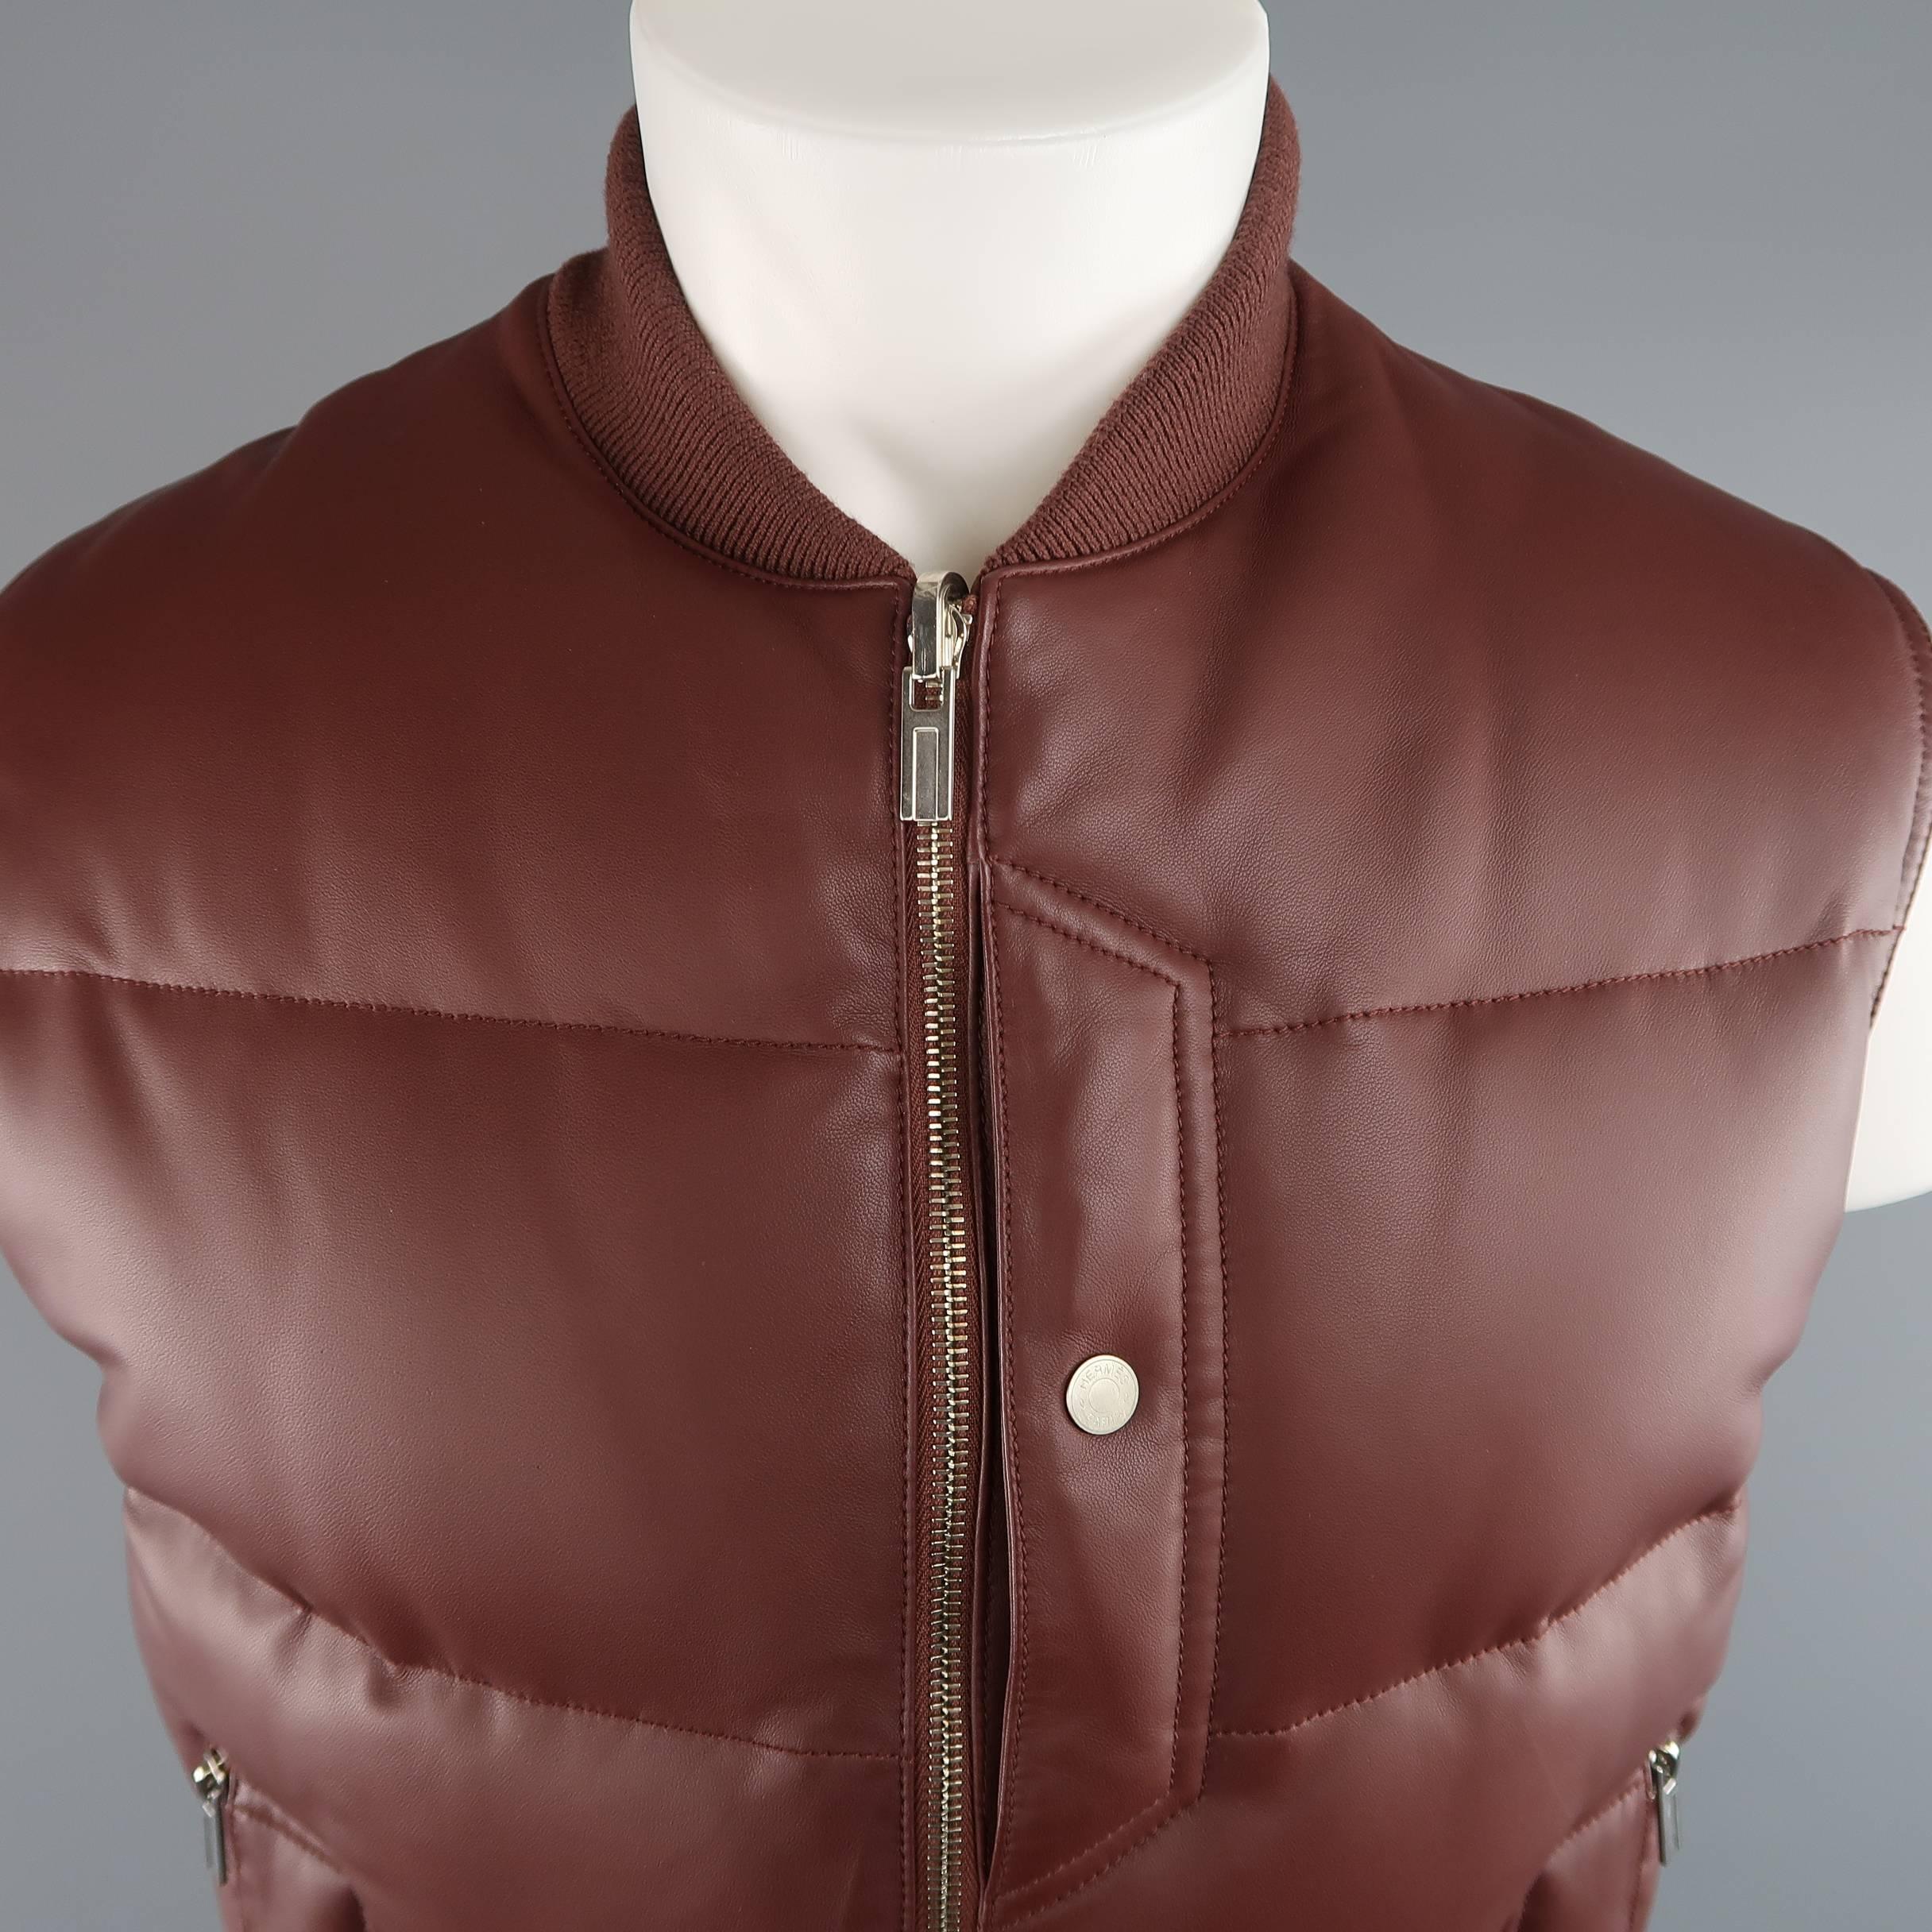 HERMES down filled puff vest comes in a rich light burgundy brown quilted lambskin leather and features a knit baseball collar, silver tone double zip front, triple snap and zip pockets, underarm grommets, and reverse nylon option. Made in France.
